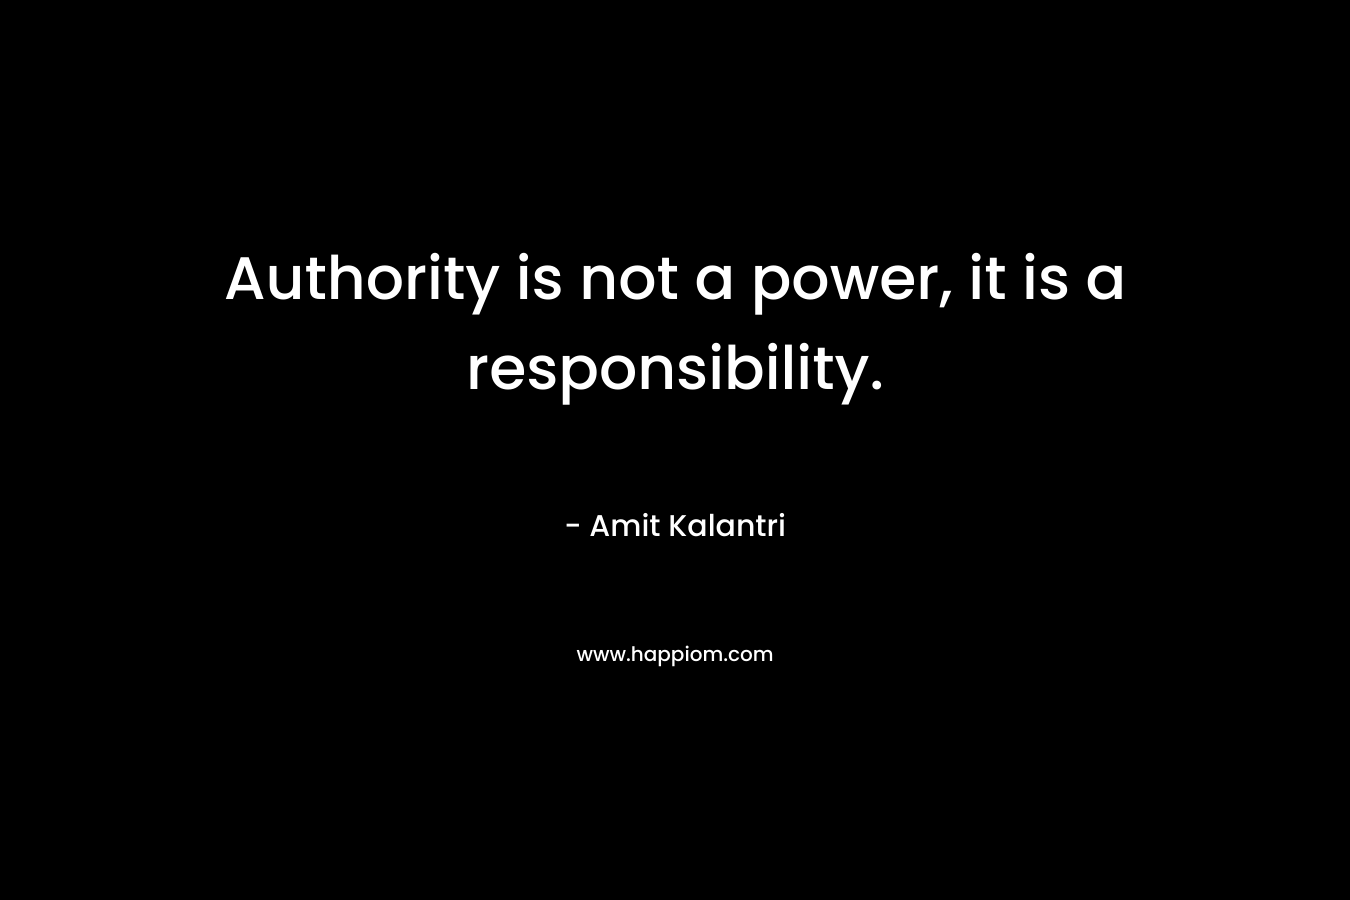 Authority is not a power, it is a responsibility.